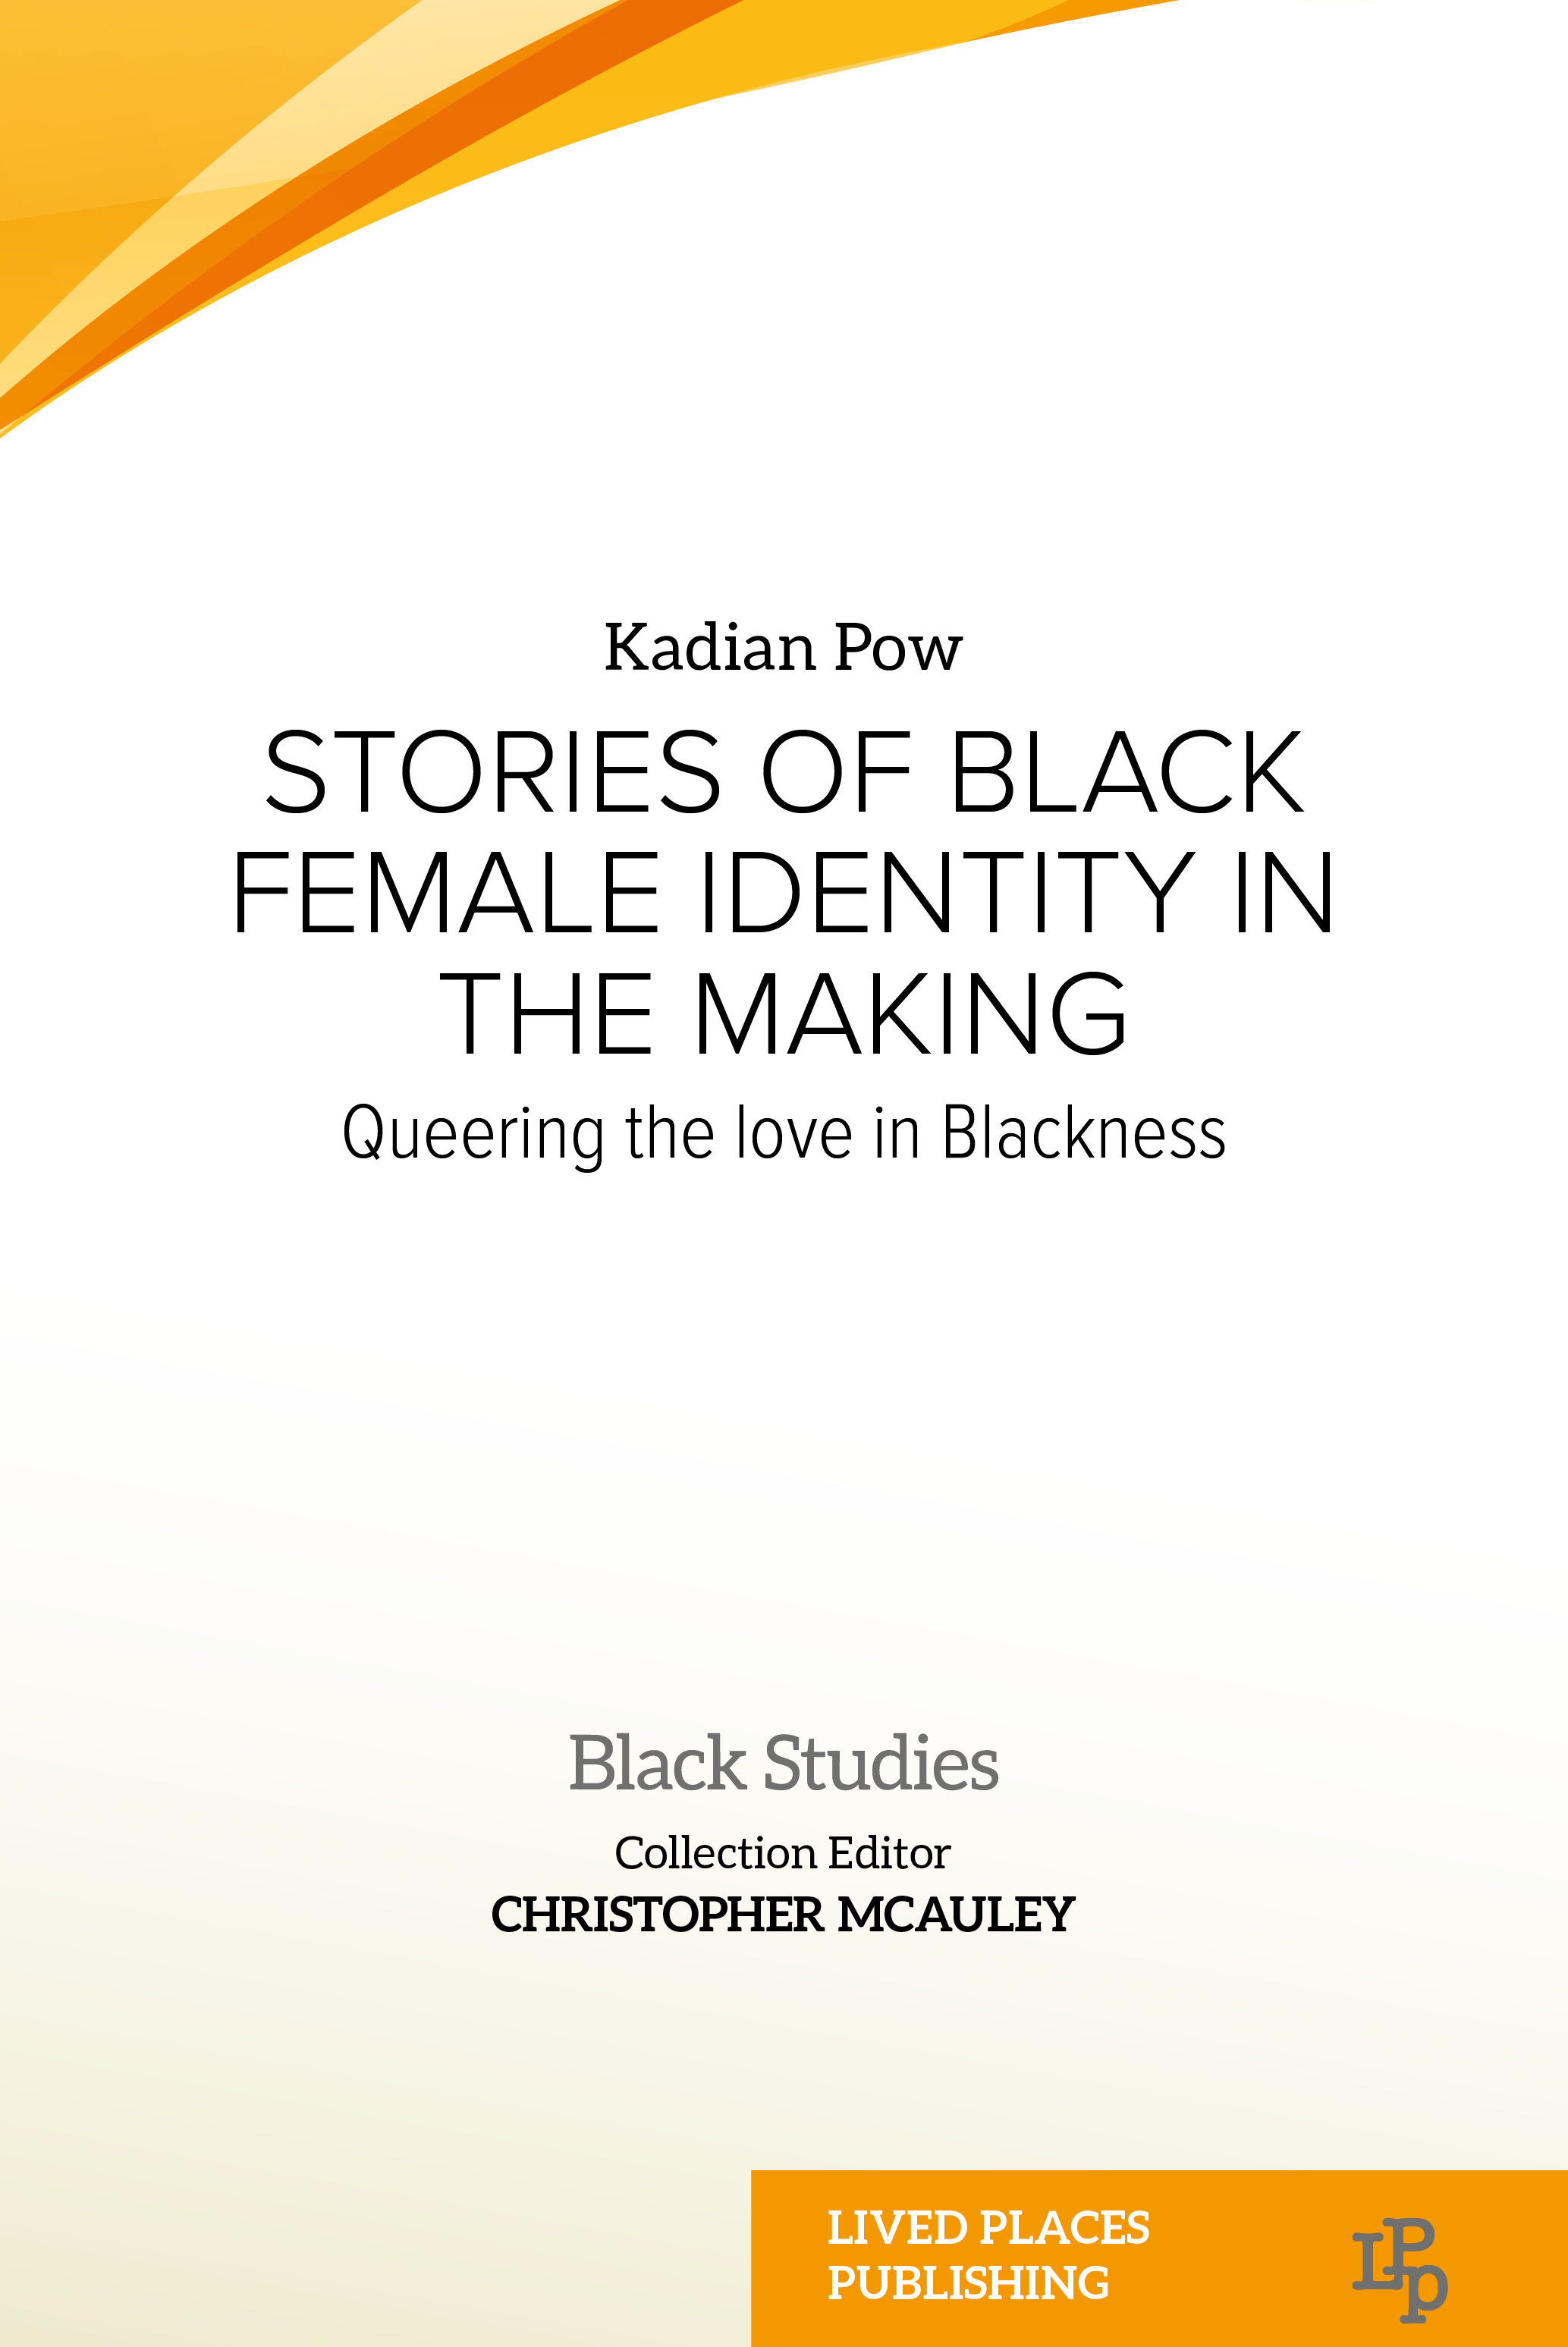 Stories of Black Female Identity in the Making